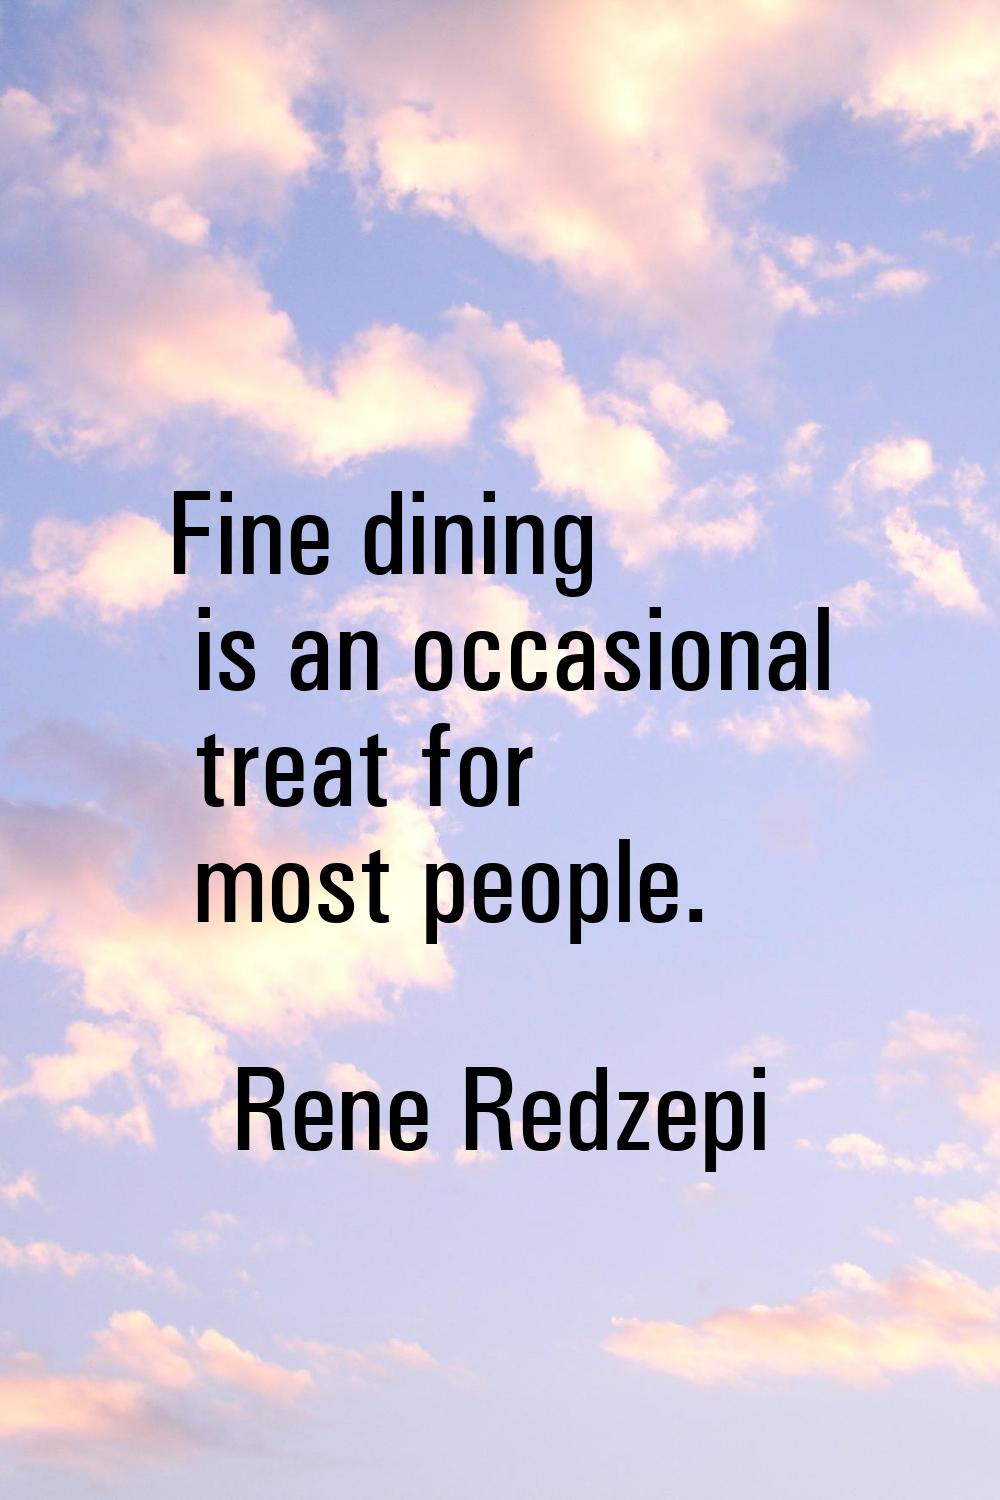 Fine dining is an occasional treat for most people.